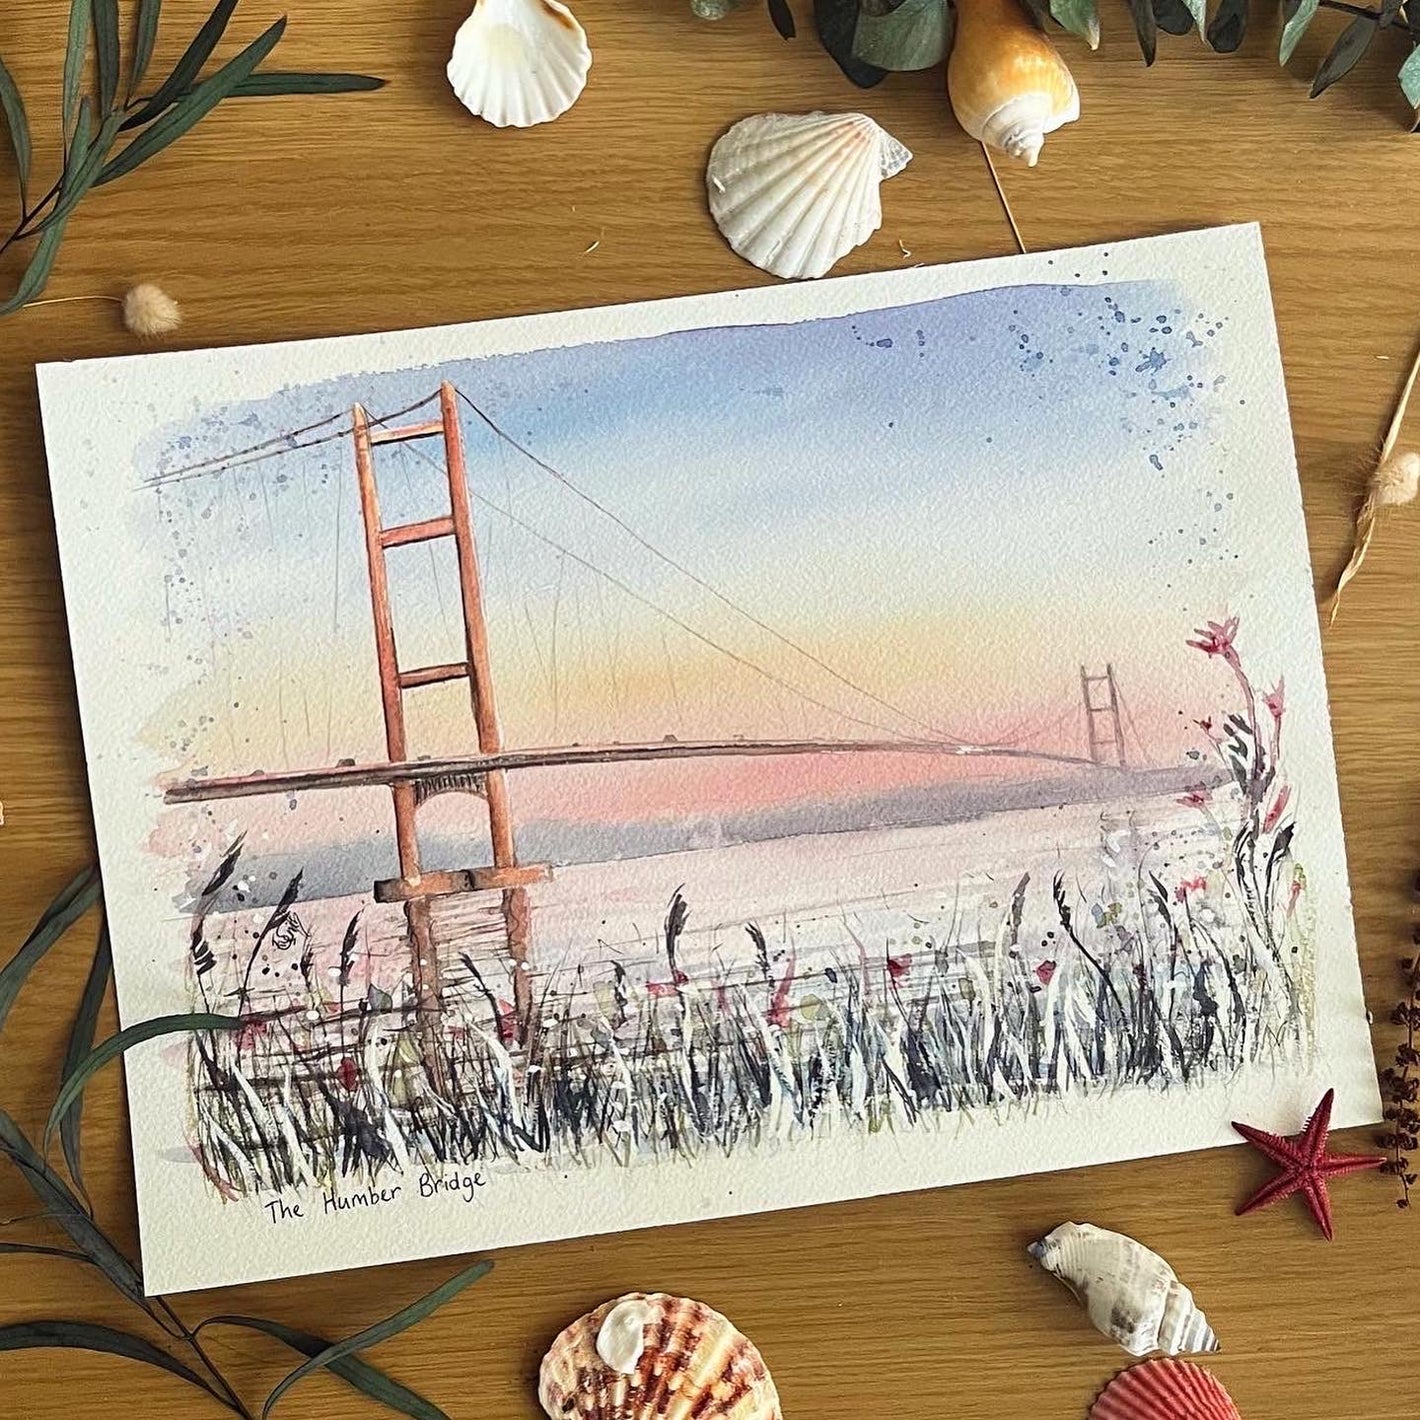 An original watercolour painting of the Humber Bridge at sunset by Eve Leoni Smith, a local artist based in Lincolnshire.